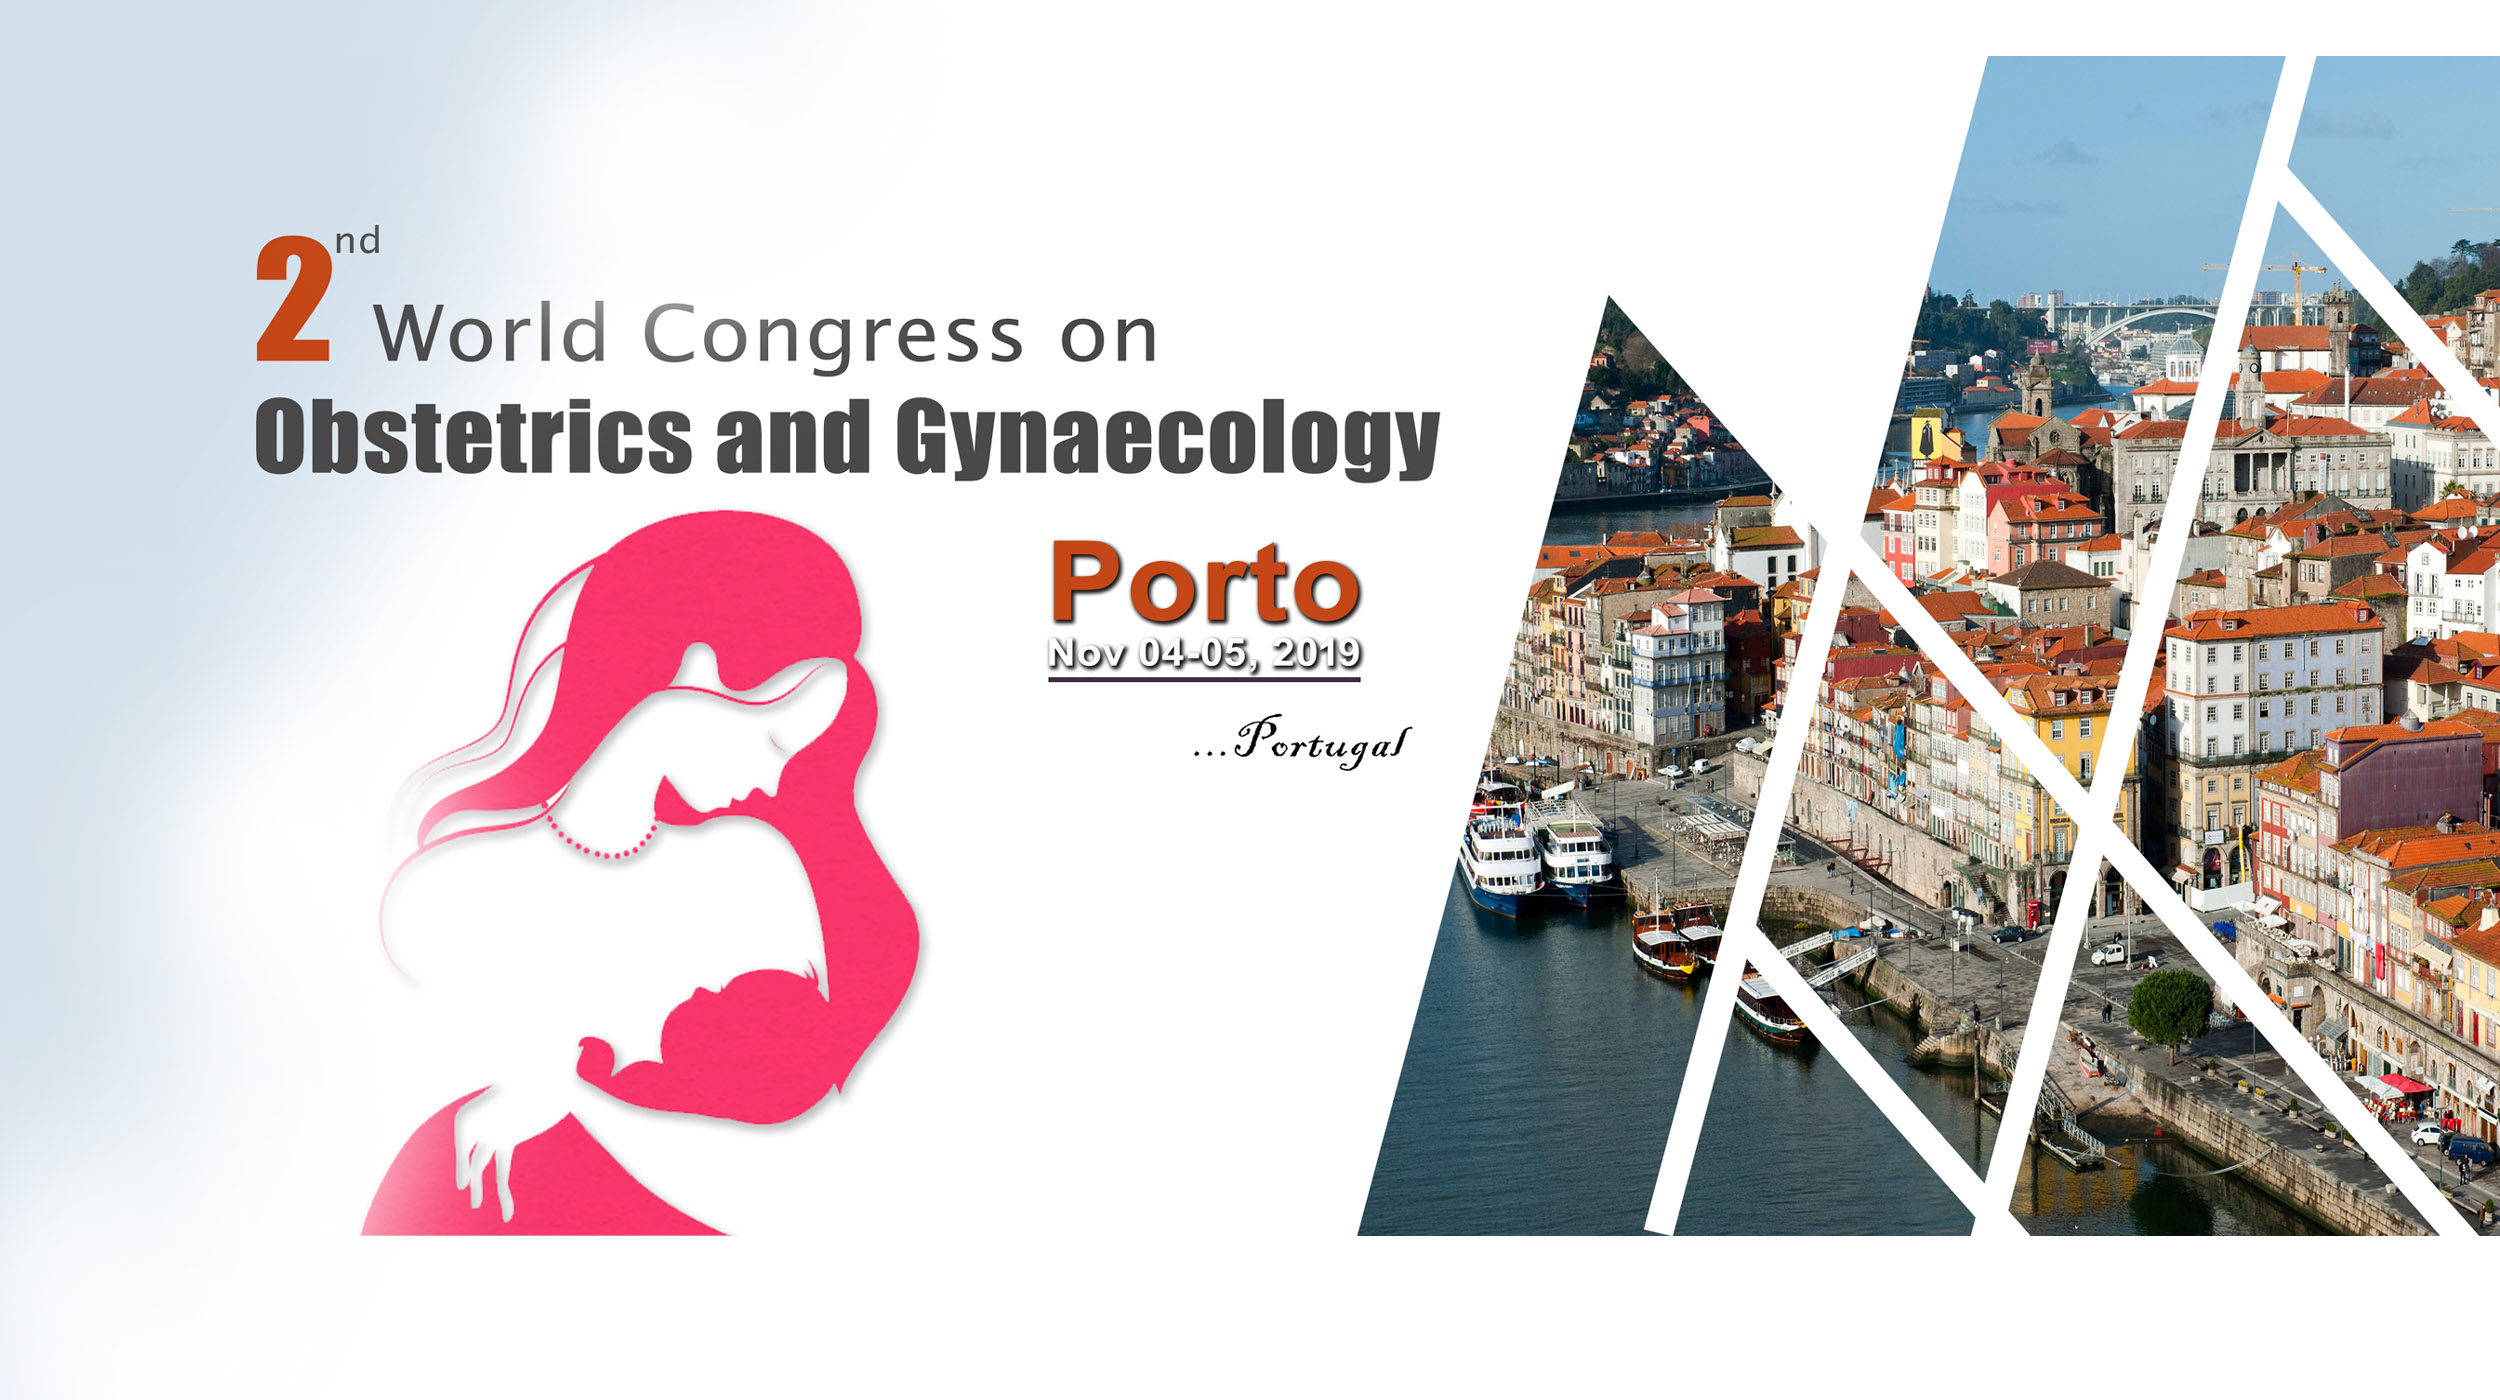 Obstetrics and Gynaecology 2019, Porto, Portugal